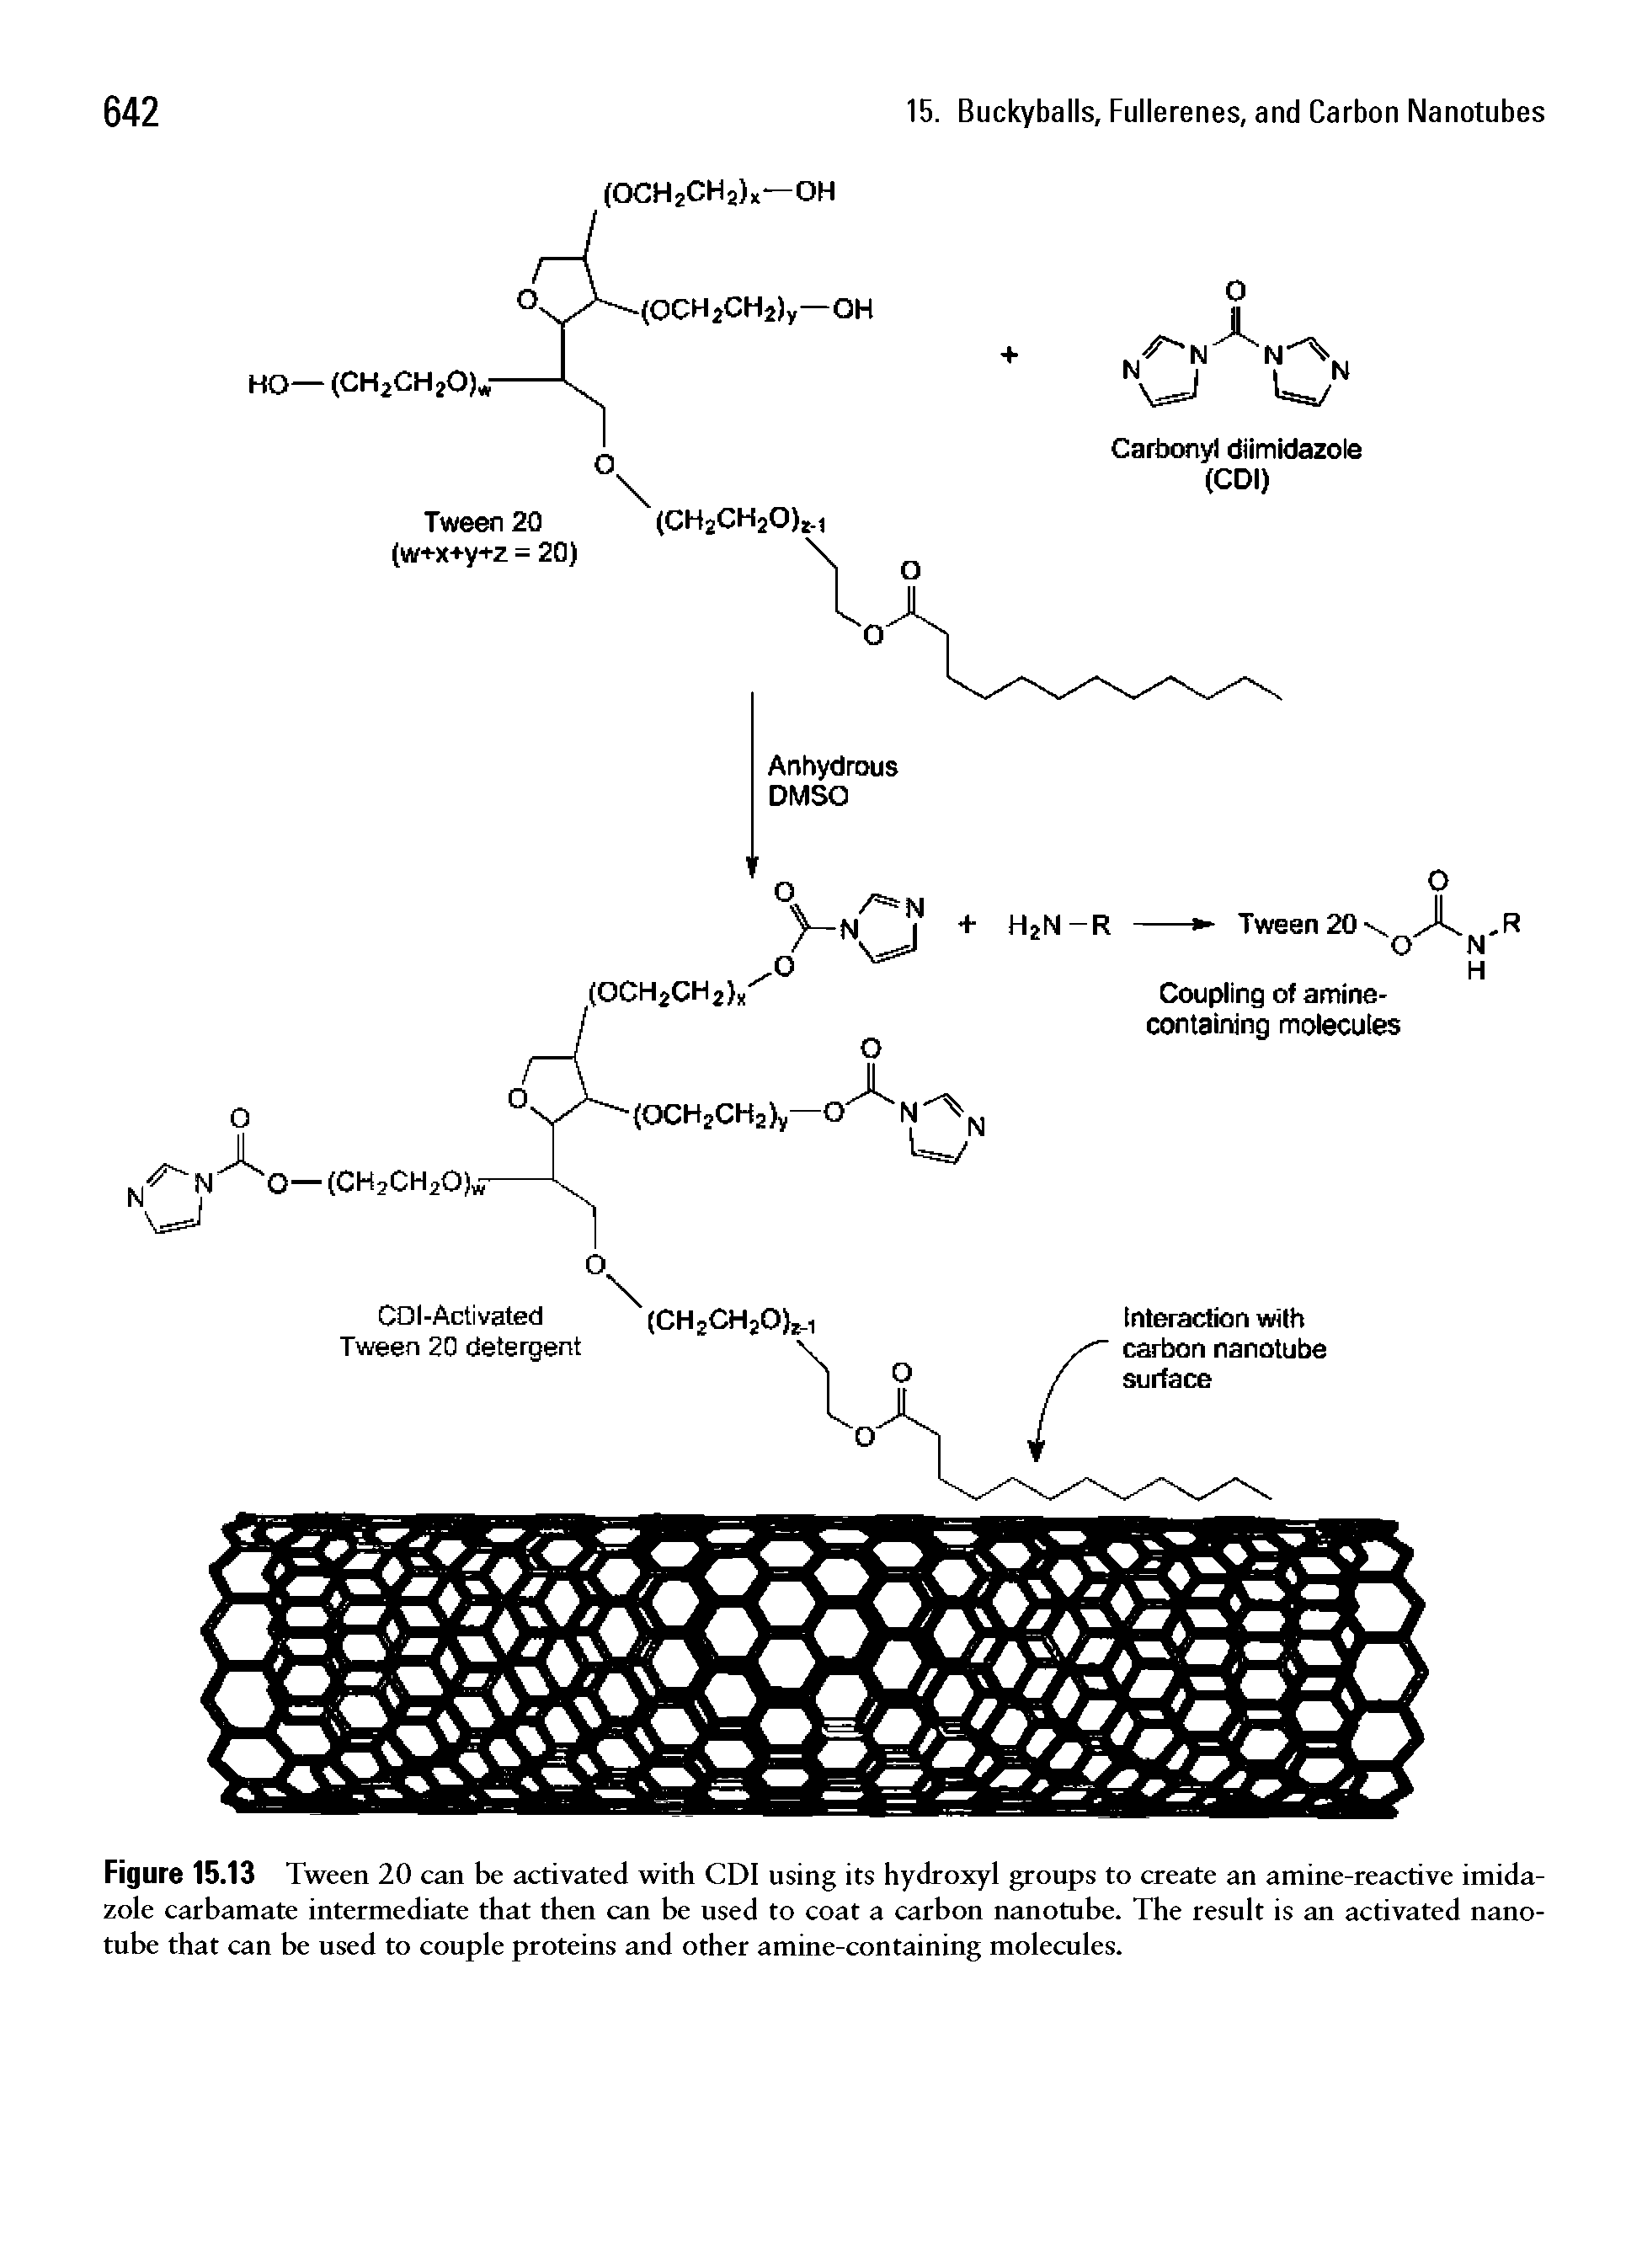 Figure 15.13 Tween 20 can be activated with CDI using its hydroxyl groups to create an amine-reactive imidazole carbamate intermediate that then can be used to coat a carbon nanotube. The result is an activated nanotube that can be used to couple proteins and other amine-containing molecules.